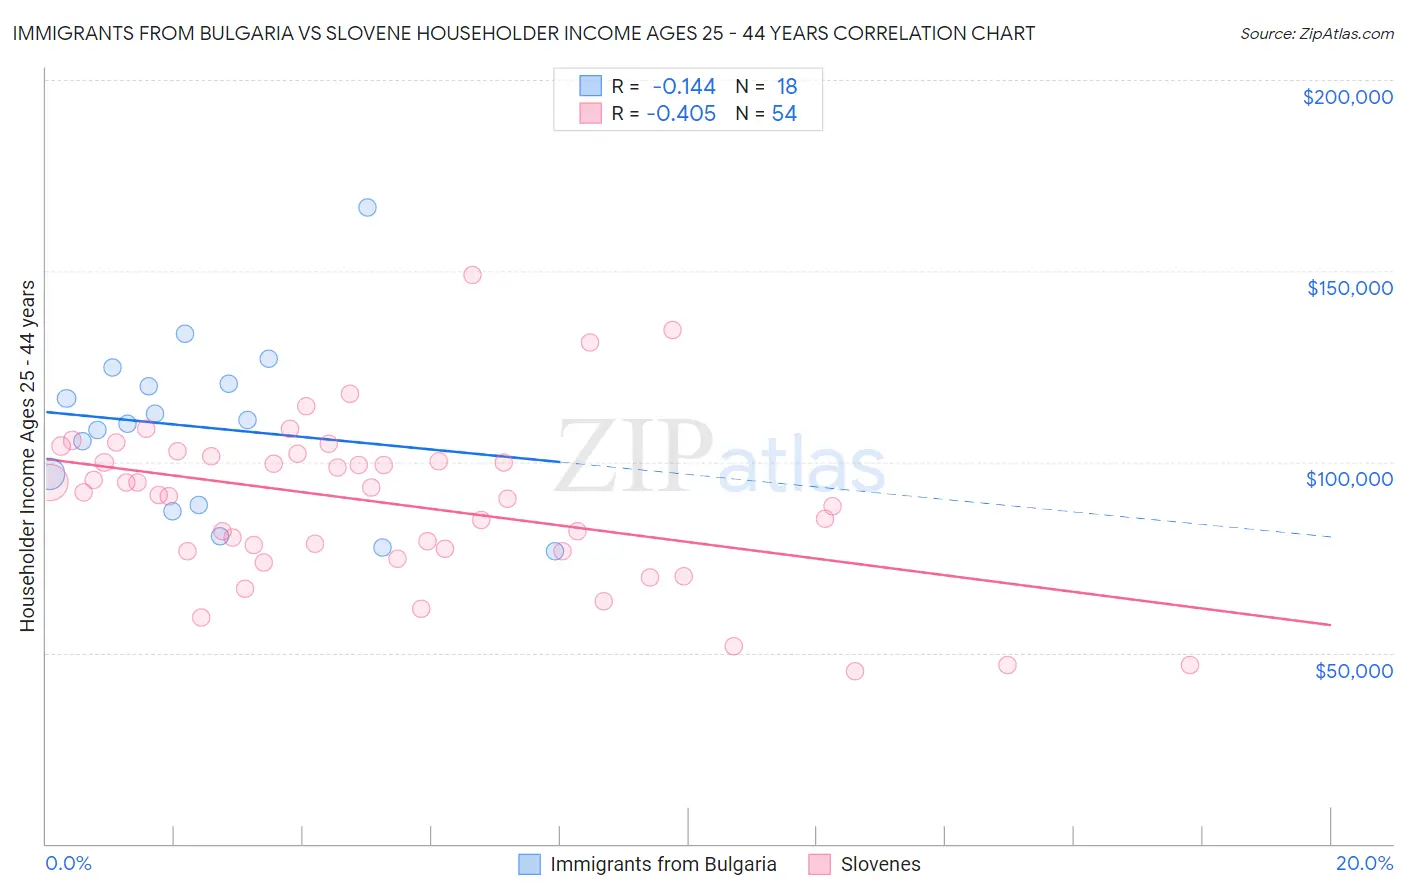 Immigrants from Bulgaria vs Slovene Householder Income Ages 25 - 44 years